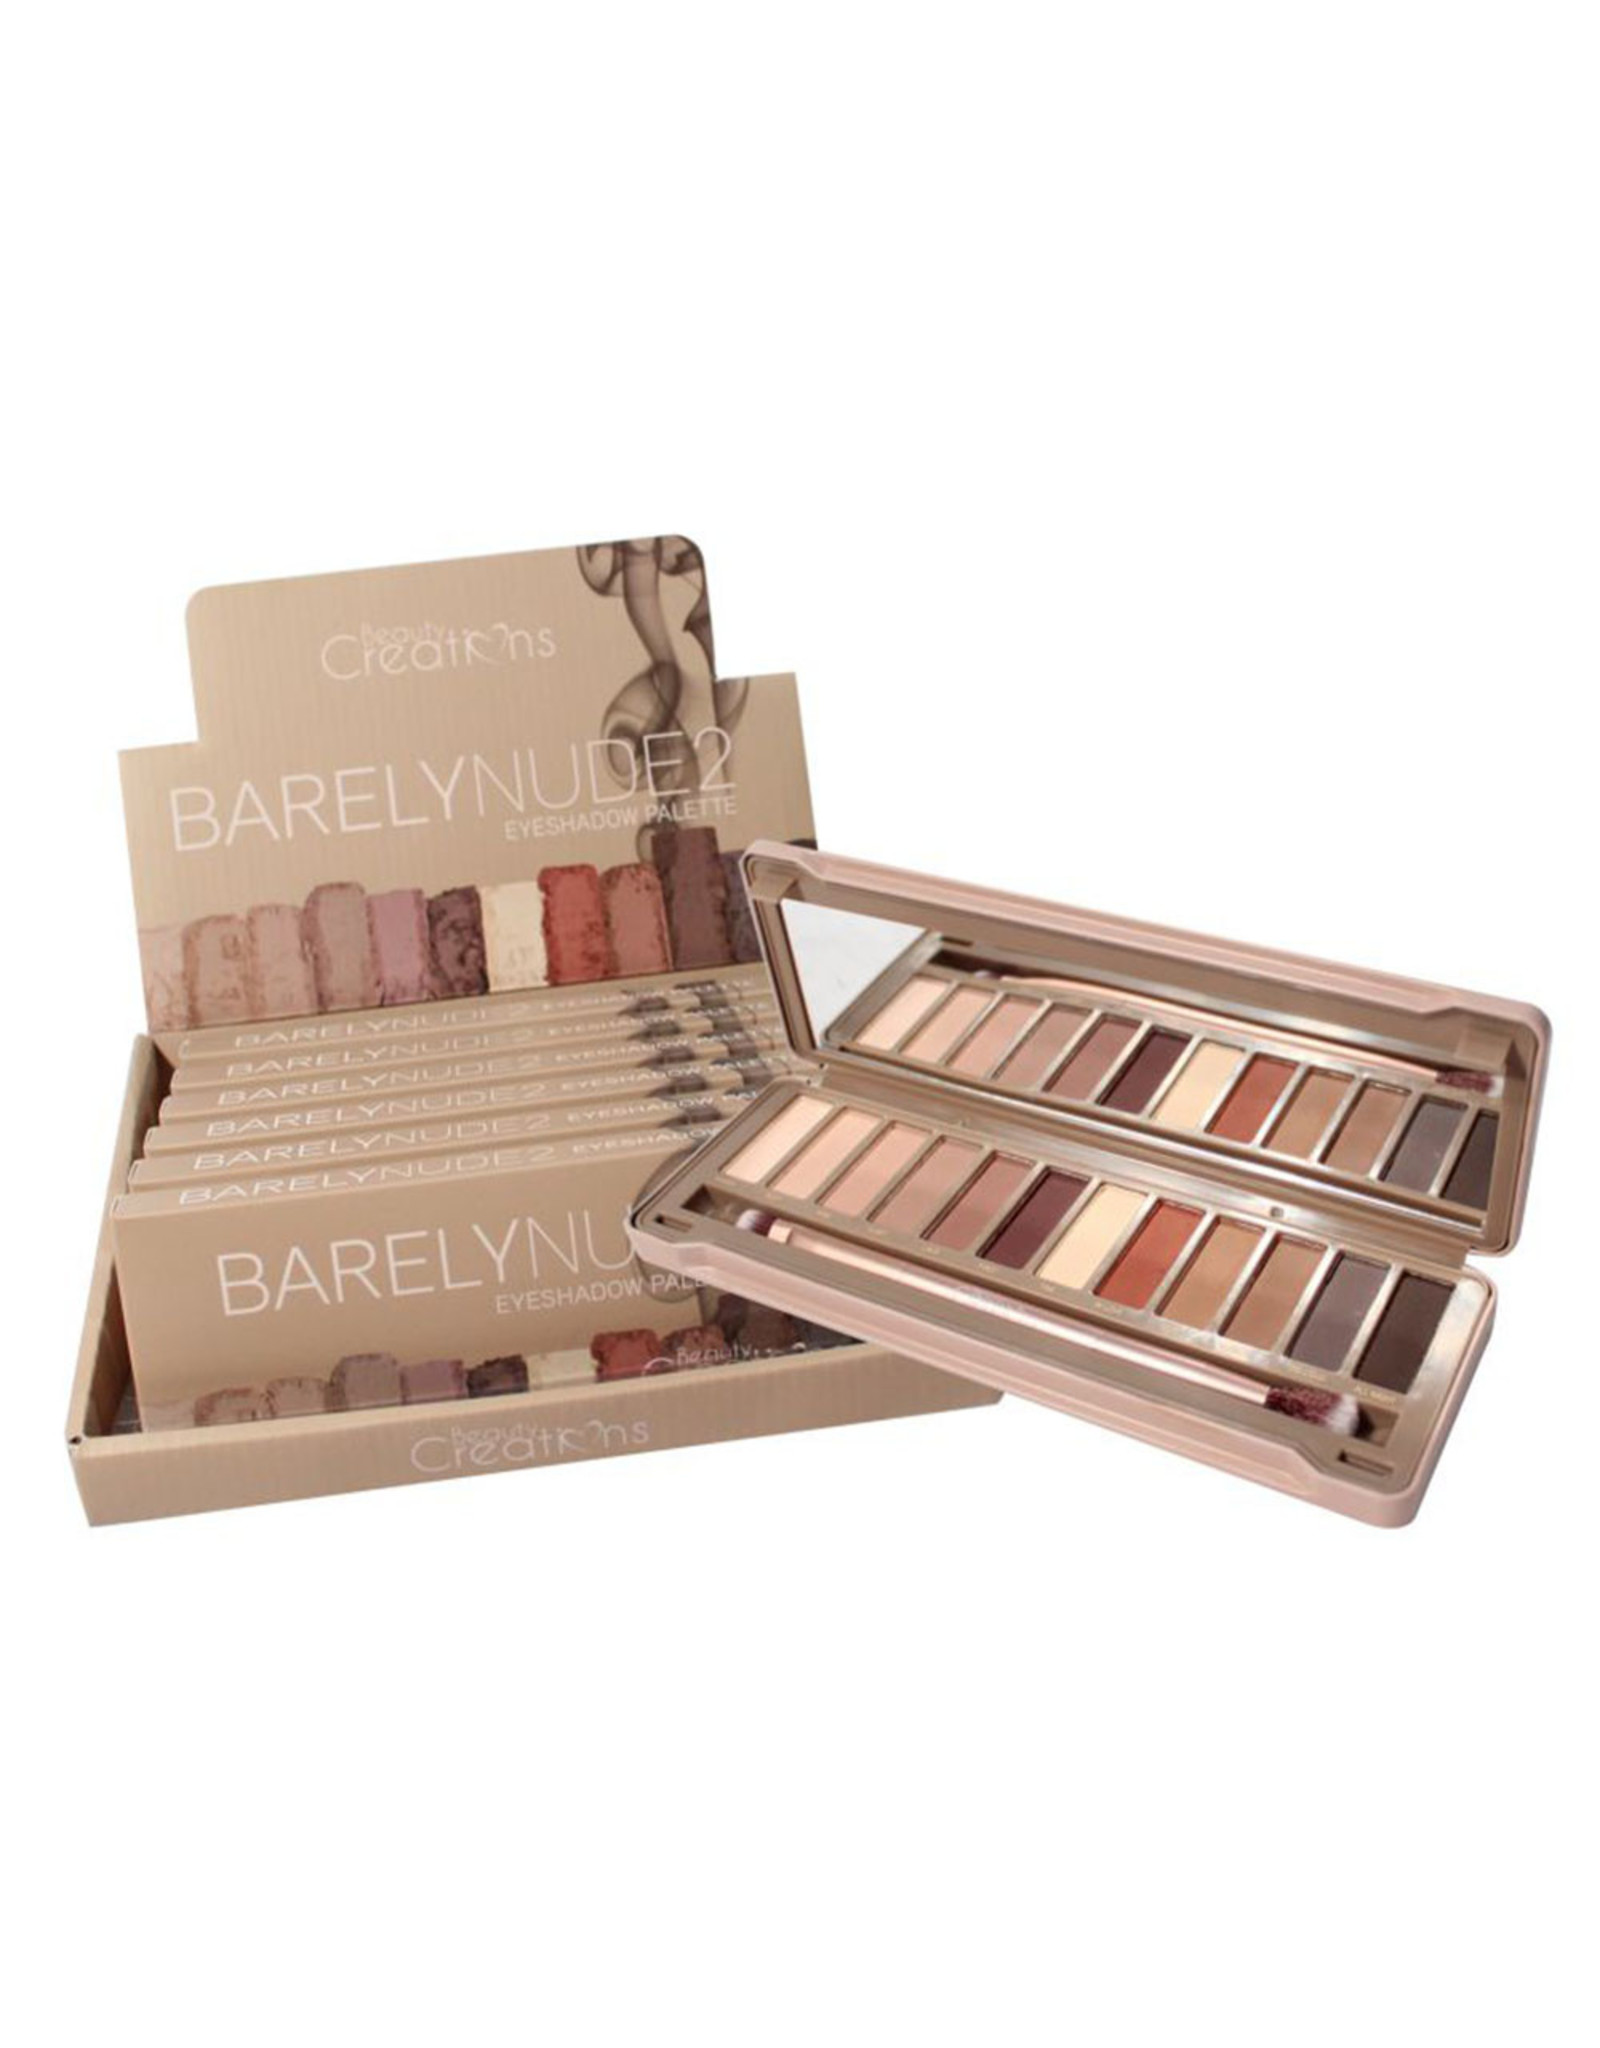 Beauty Creations Beauty Creations Barely Nude 2 Eyeshadow Palette